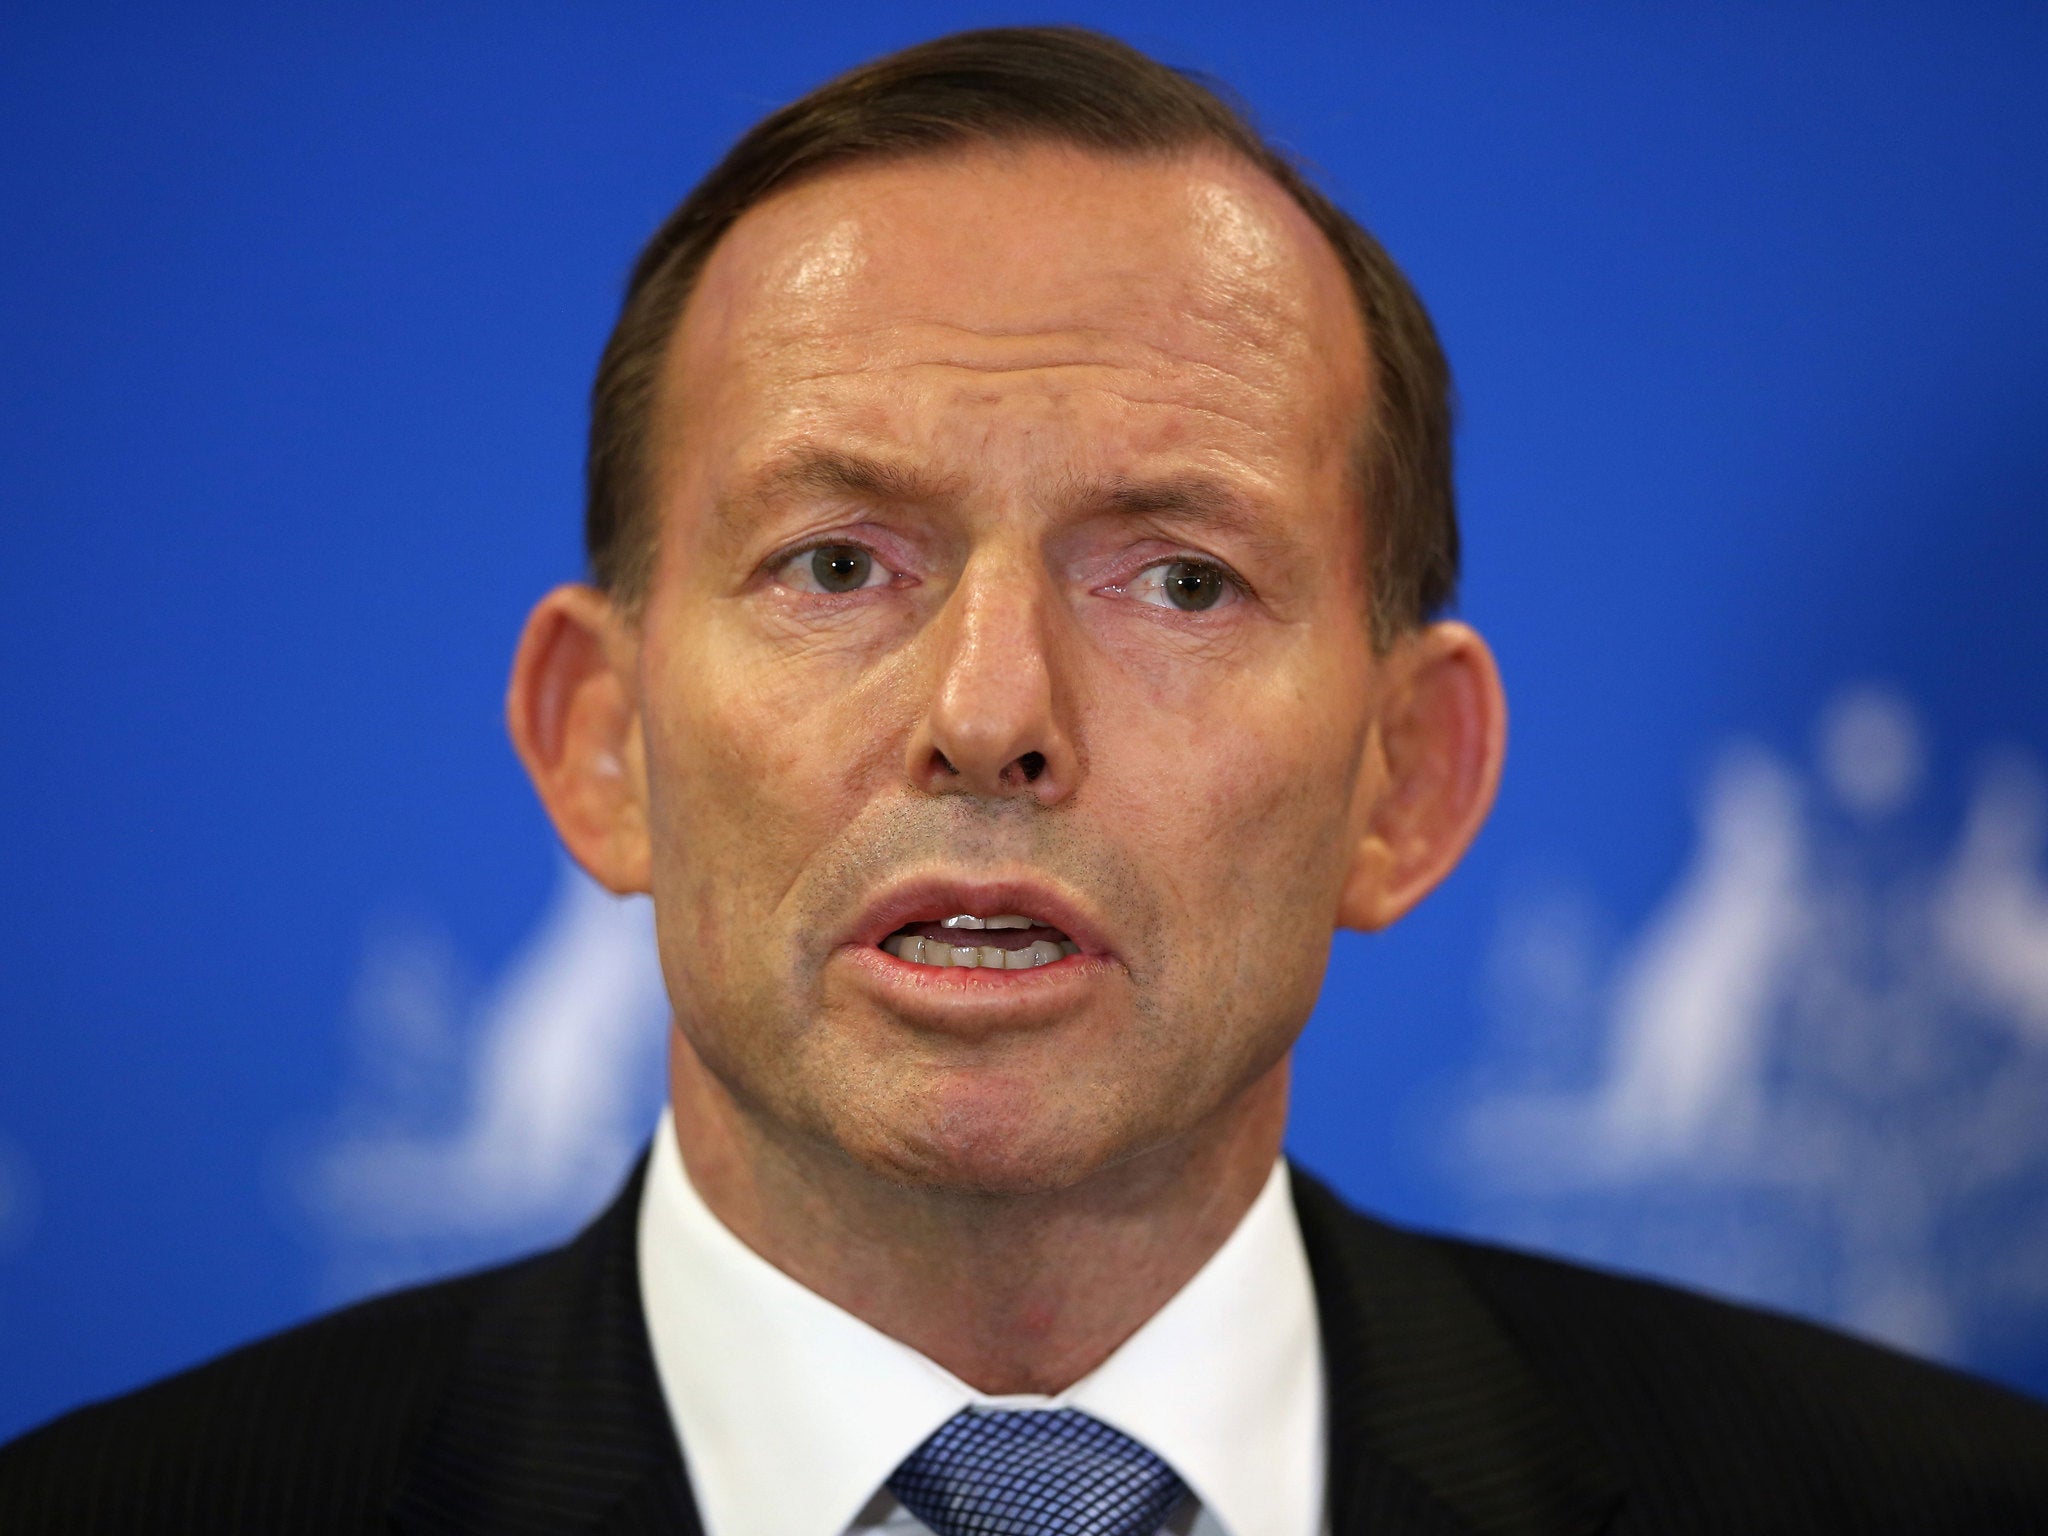 Tony Abbott has been criticised for saying Islamic State worse than Nazis